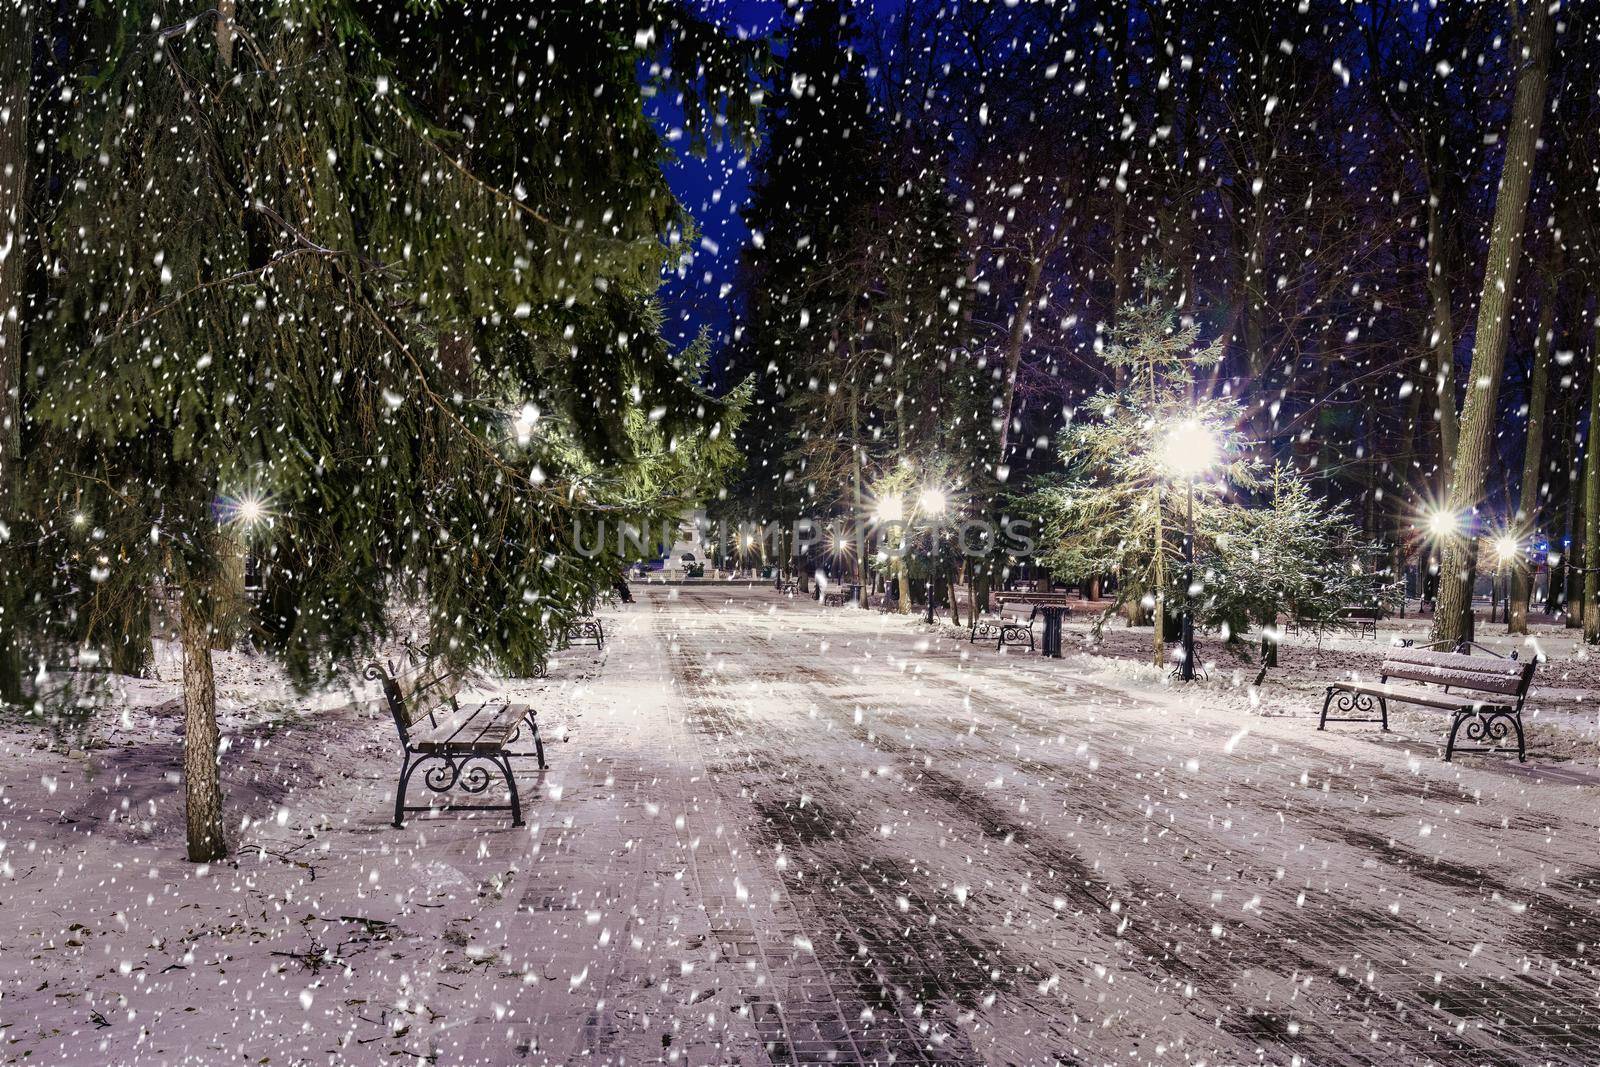 Snowfall in a winter park at night with christmas decorations, lights and  pavement covered with snow. by Eugene_Yemelyanov